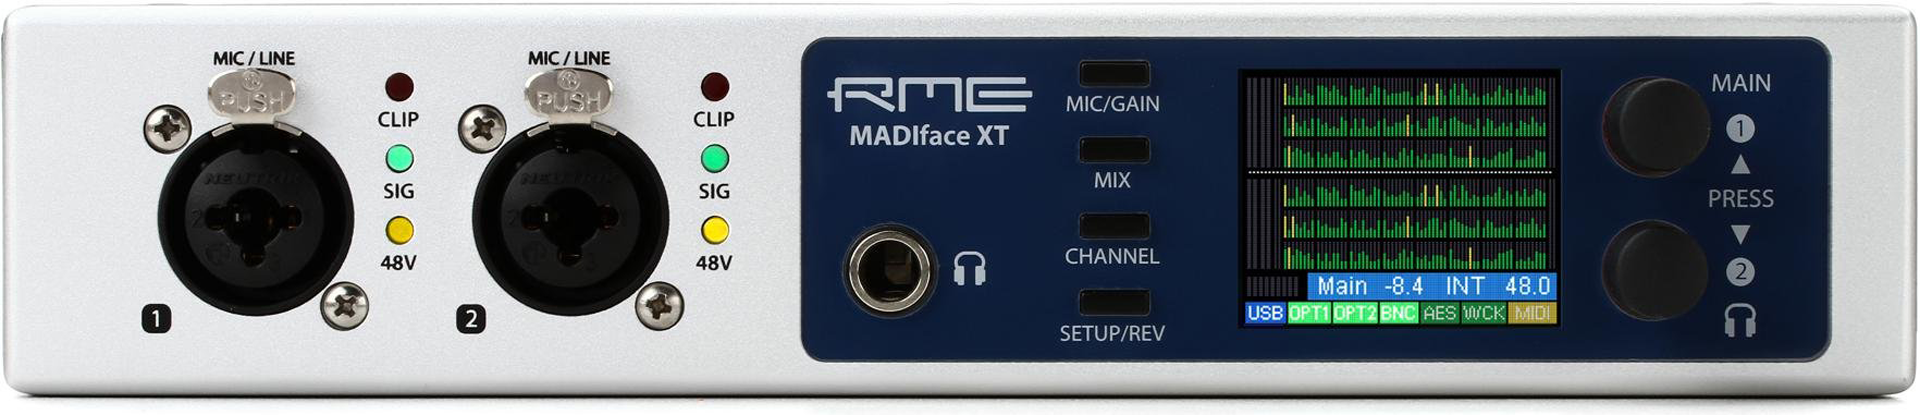 The RME MADIface XT is a high-end audio interface.